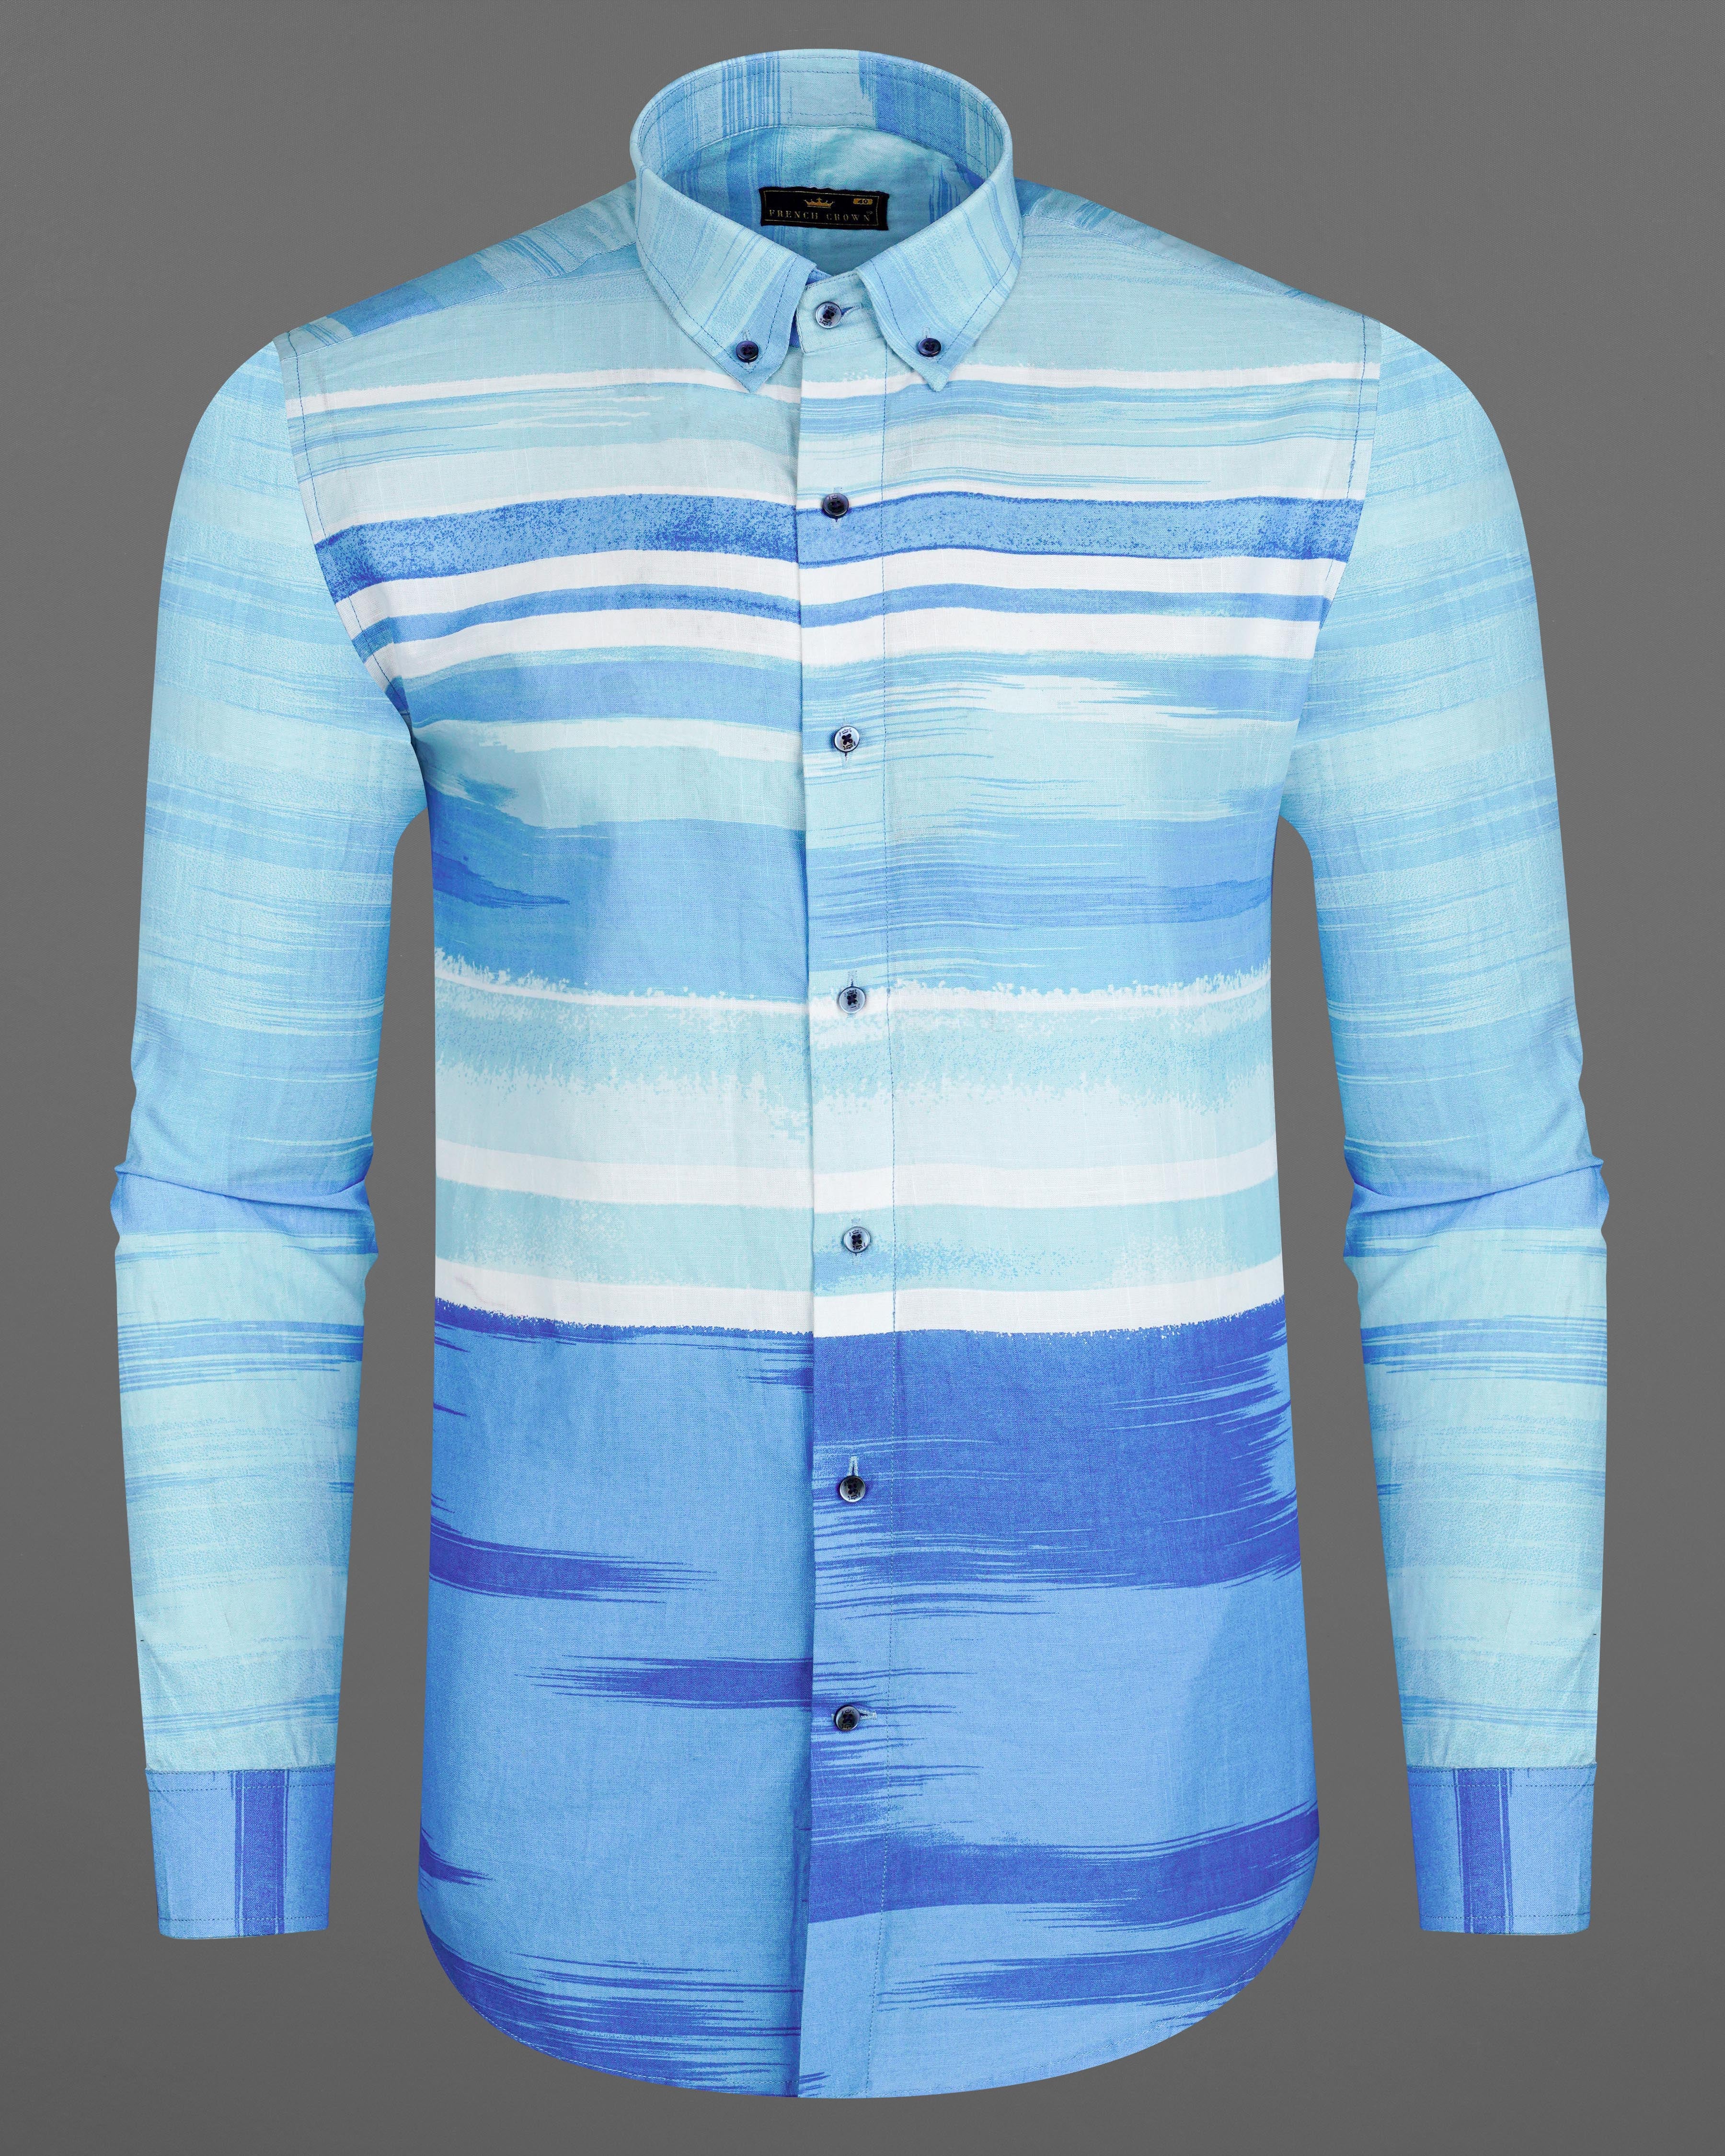 Crystal Sky Blue with Muted Blue Striped Premium Cotton Shirt 8468-BD-BLE-38,8468-BD-BLE-H-38,8468-BD-BLE-9,8468-BD-BLE-9,8468-BD-BLE-40,8468-BD-BLE-H-40,8468-BD-BLE-2,8468-BD-BLE-2,8468-BD-BLE-4,8468-BD-BLE-4,8468-BD-BLE-6,8468-BD-BLE-6,8468-BD-BLE-8,8468-BD-BLE-8,8468-BD-BLE-50,8468-BD-BLE-H-50,8468-BD-BLE-2,8468-BD-BLE-2